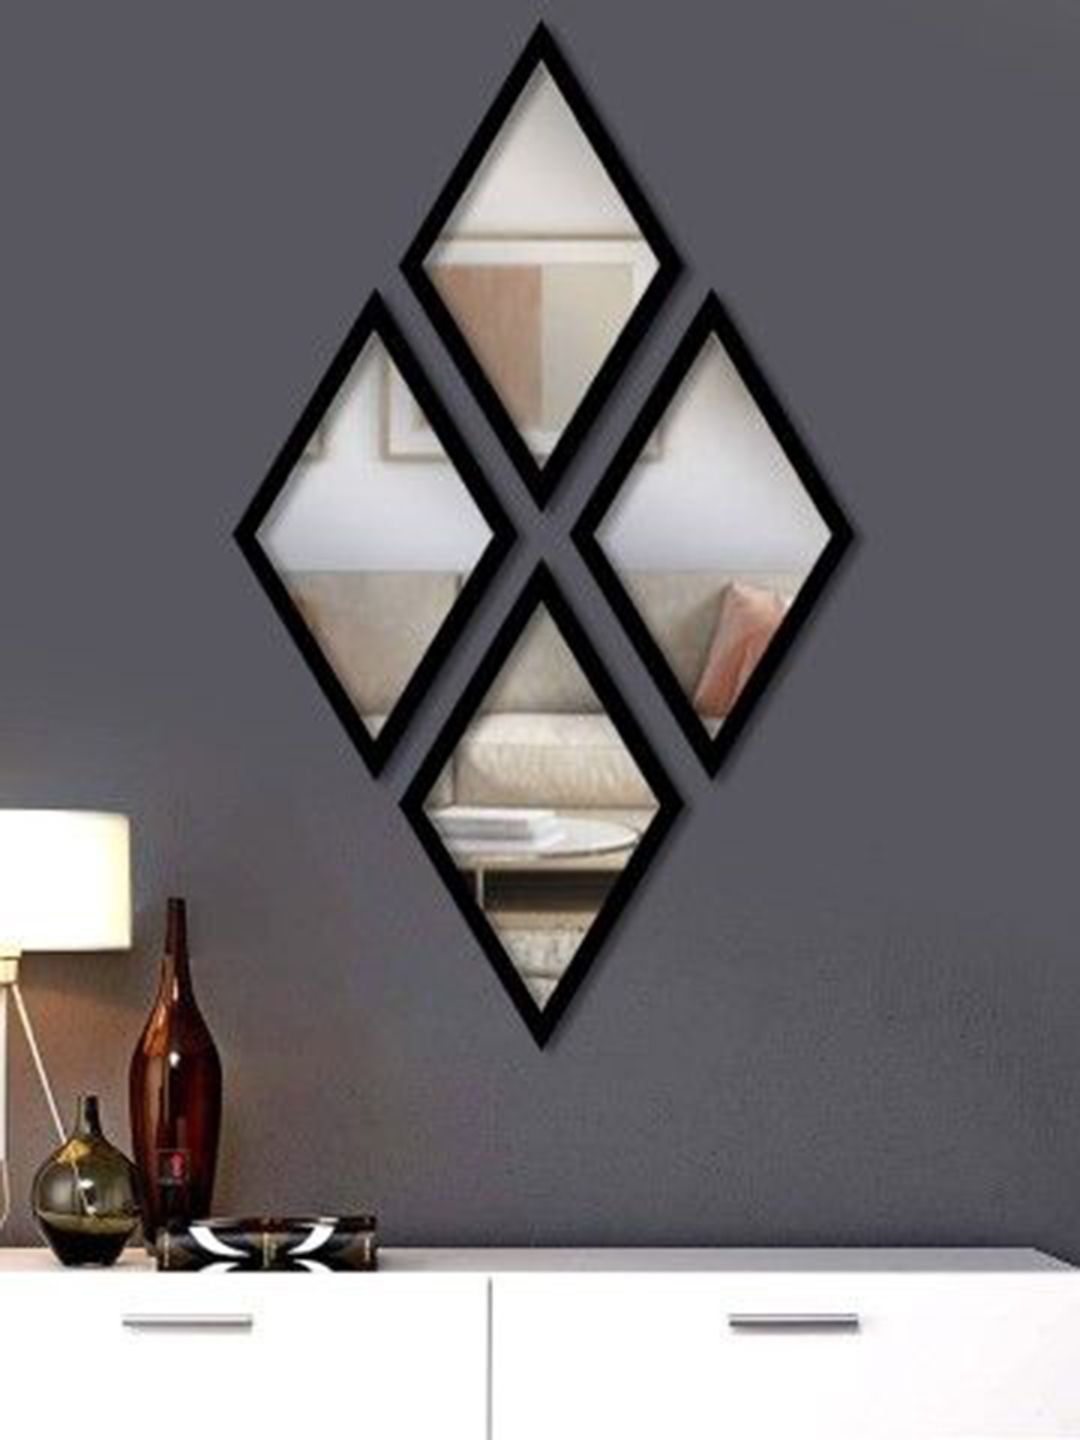 Art Street Set Of 4 Black Solid Decorative Diamond-Shaped Wall Mirrors Price in India